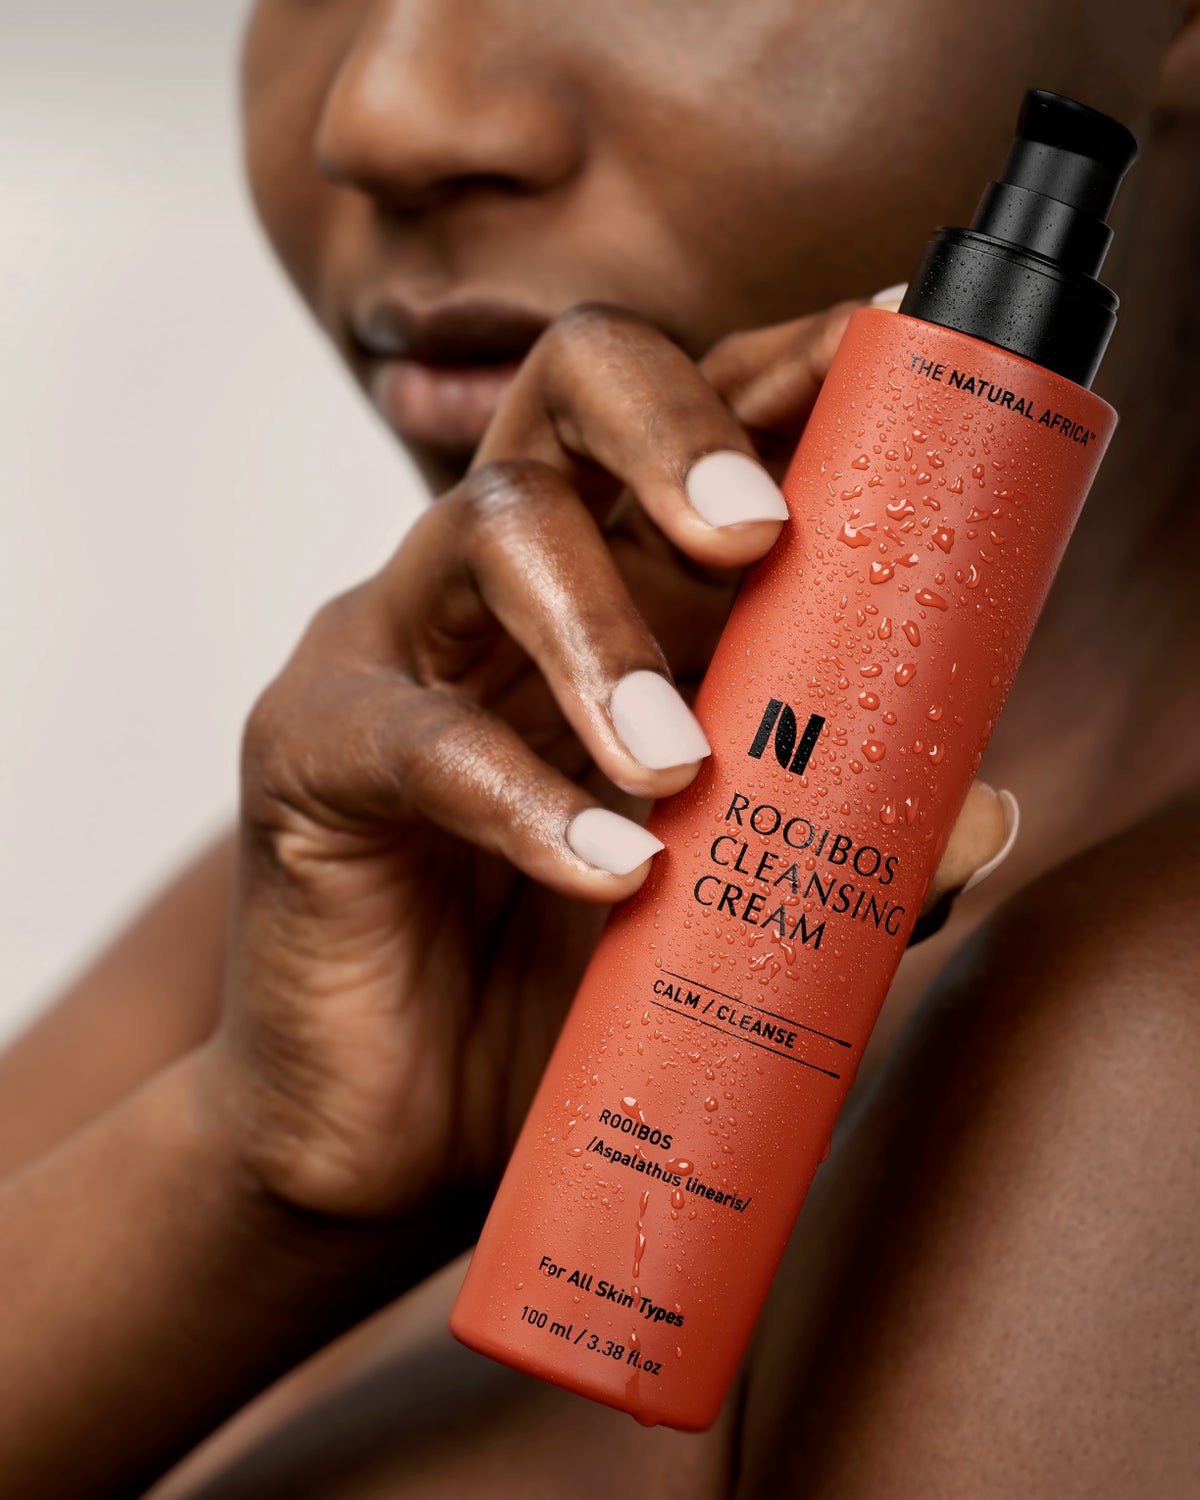 Why Southern African skincare deserves a spot on our top shelves